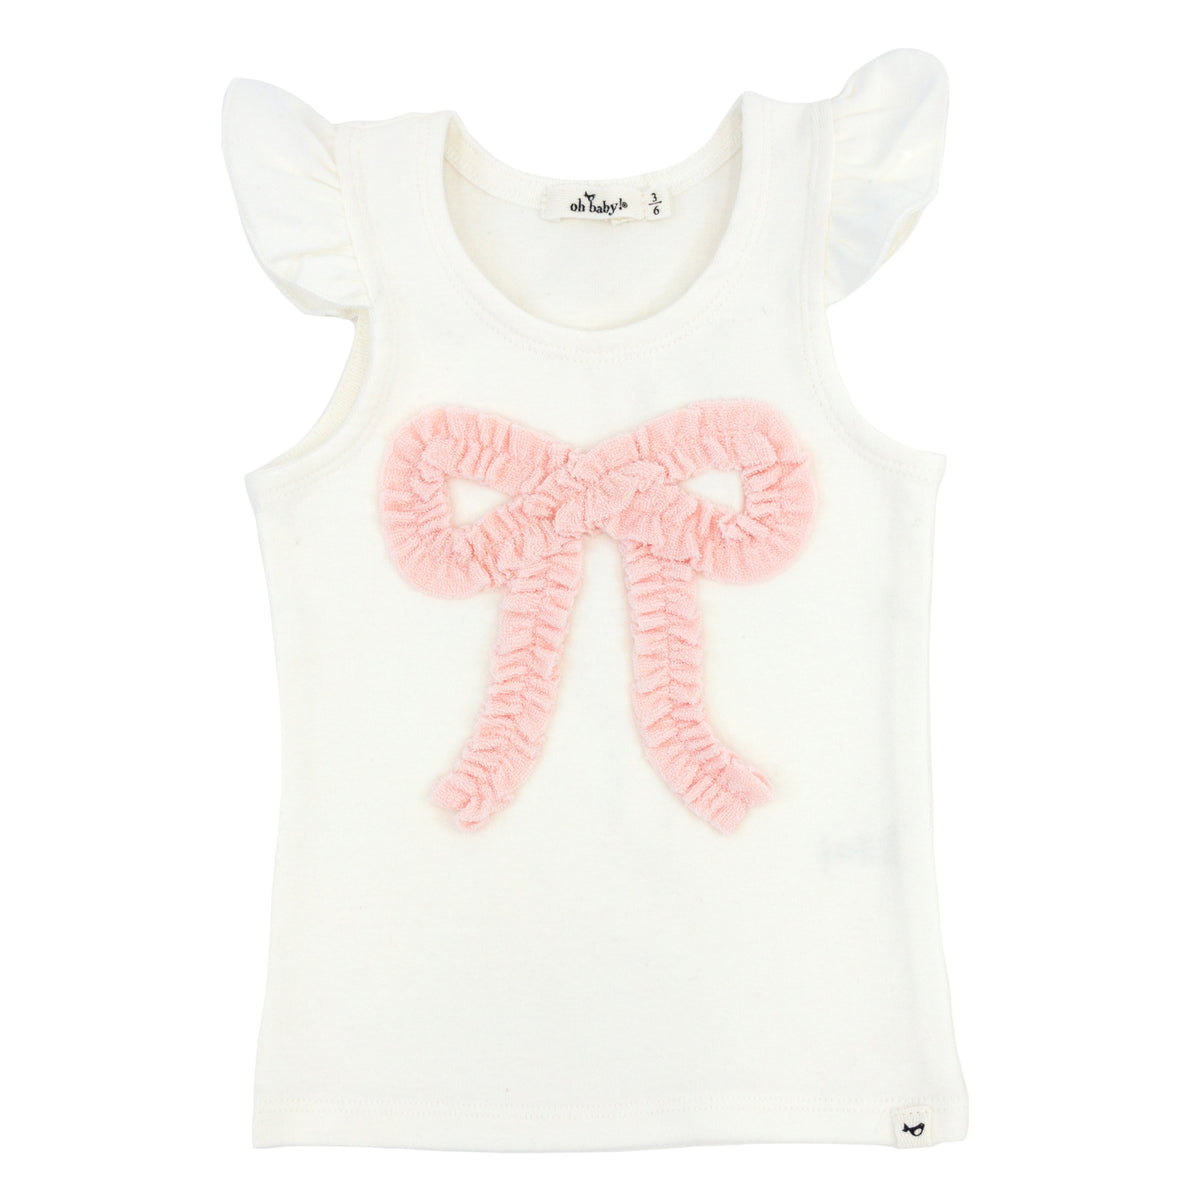 oh baby! Flutter Sleeve Tank - Pale Pink Ruffle Bow Applique - Cream